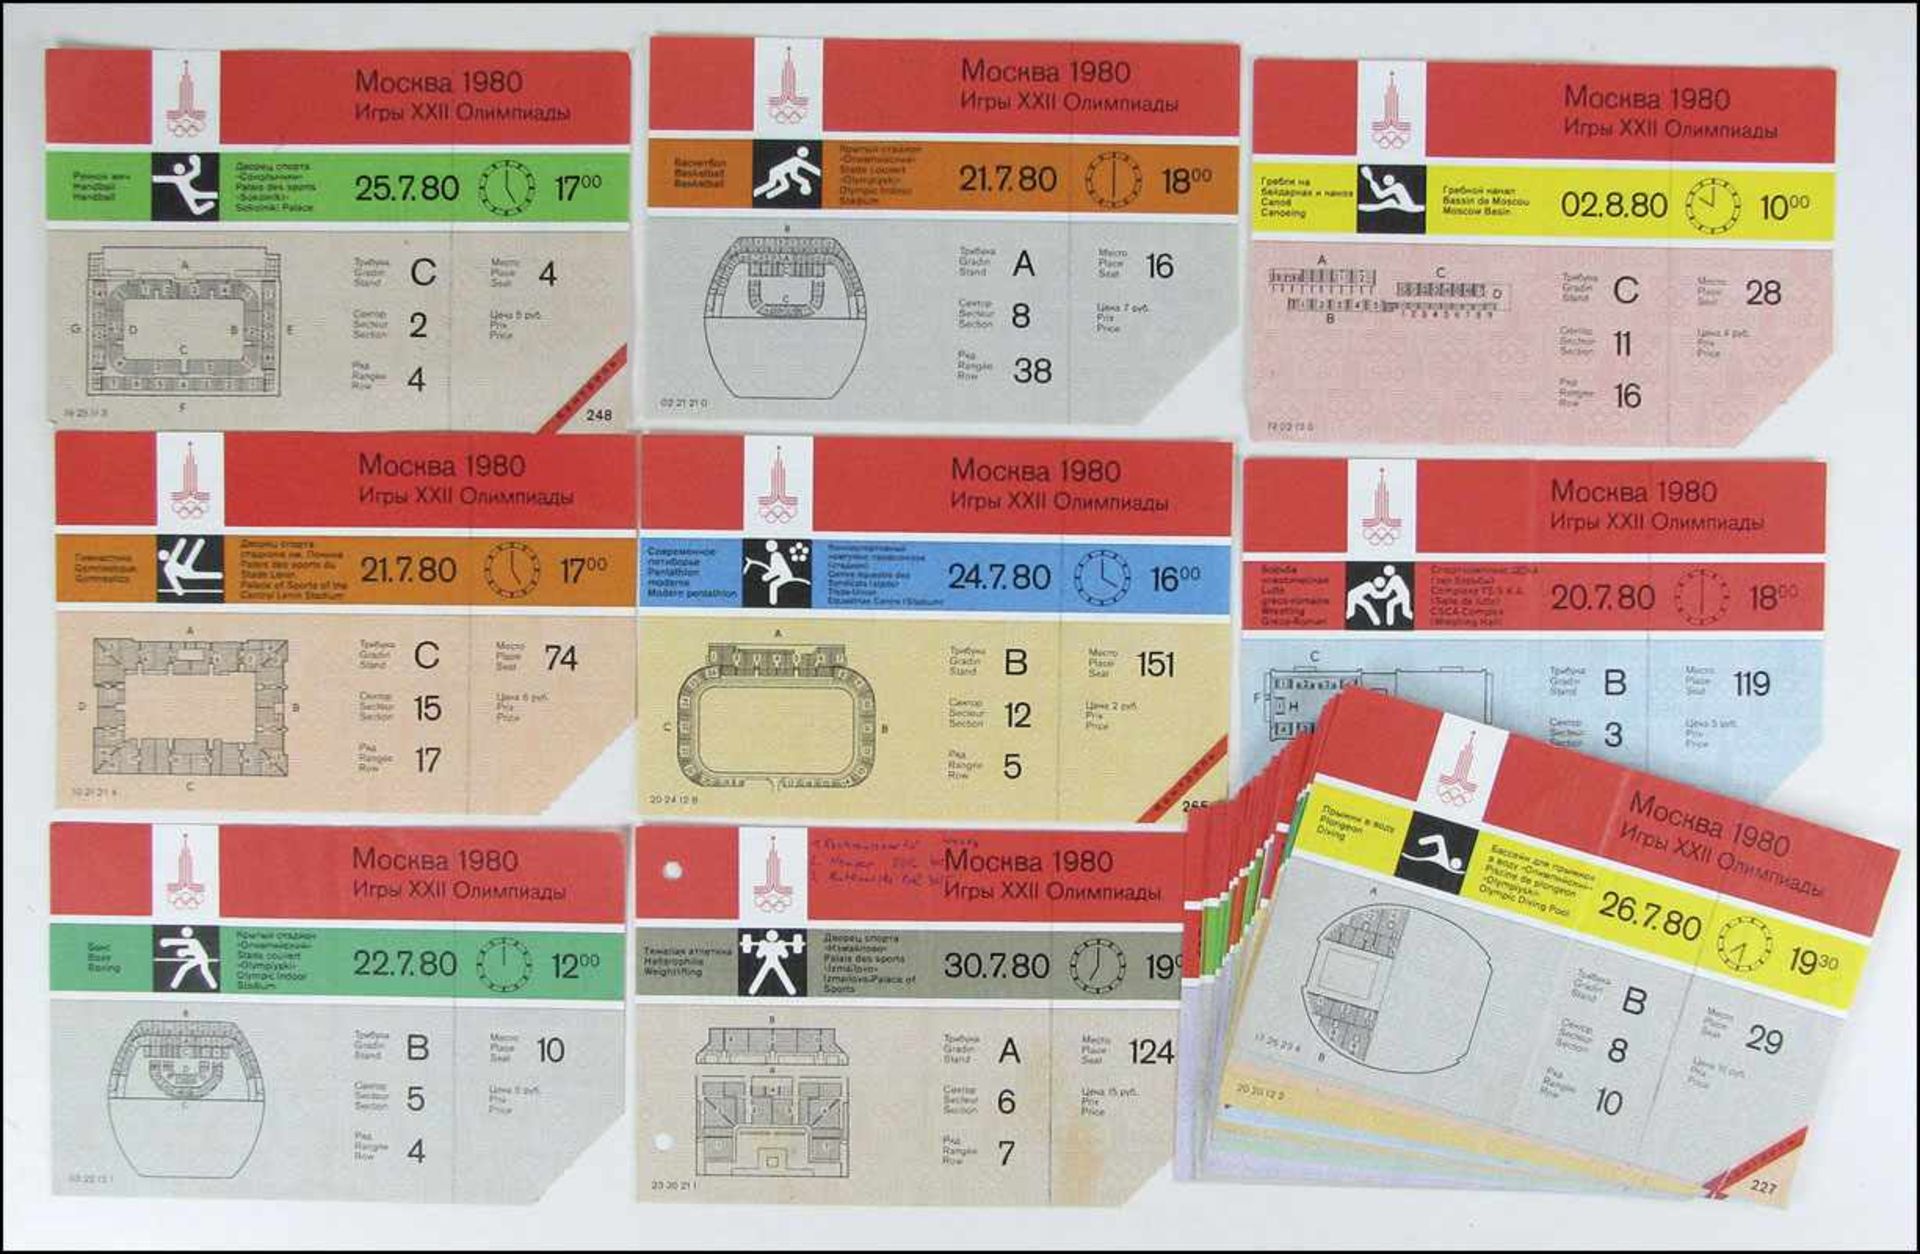 Olympic games 1980. 27 Tickets - 27 different tickets fromt the Olympic Games in Moscow 1980.